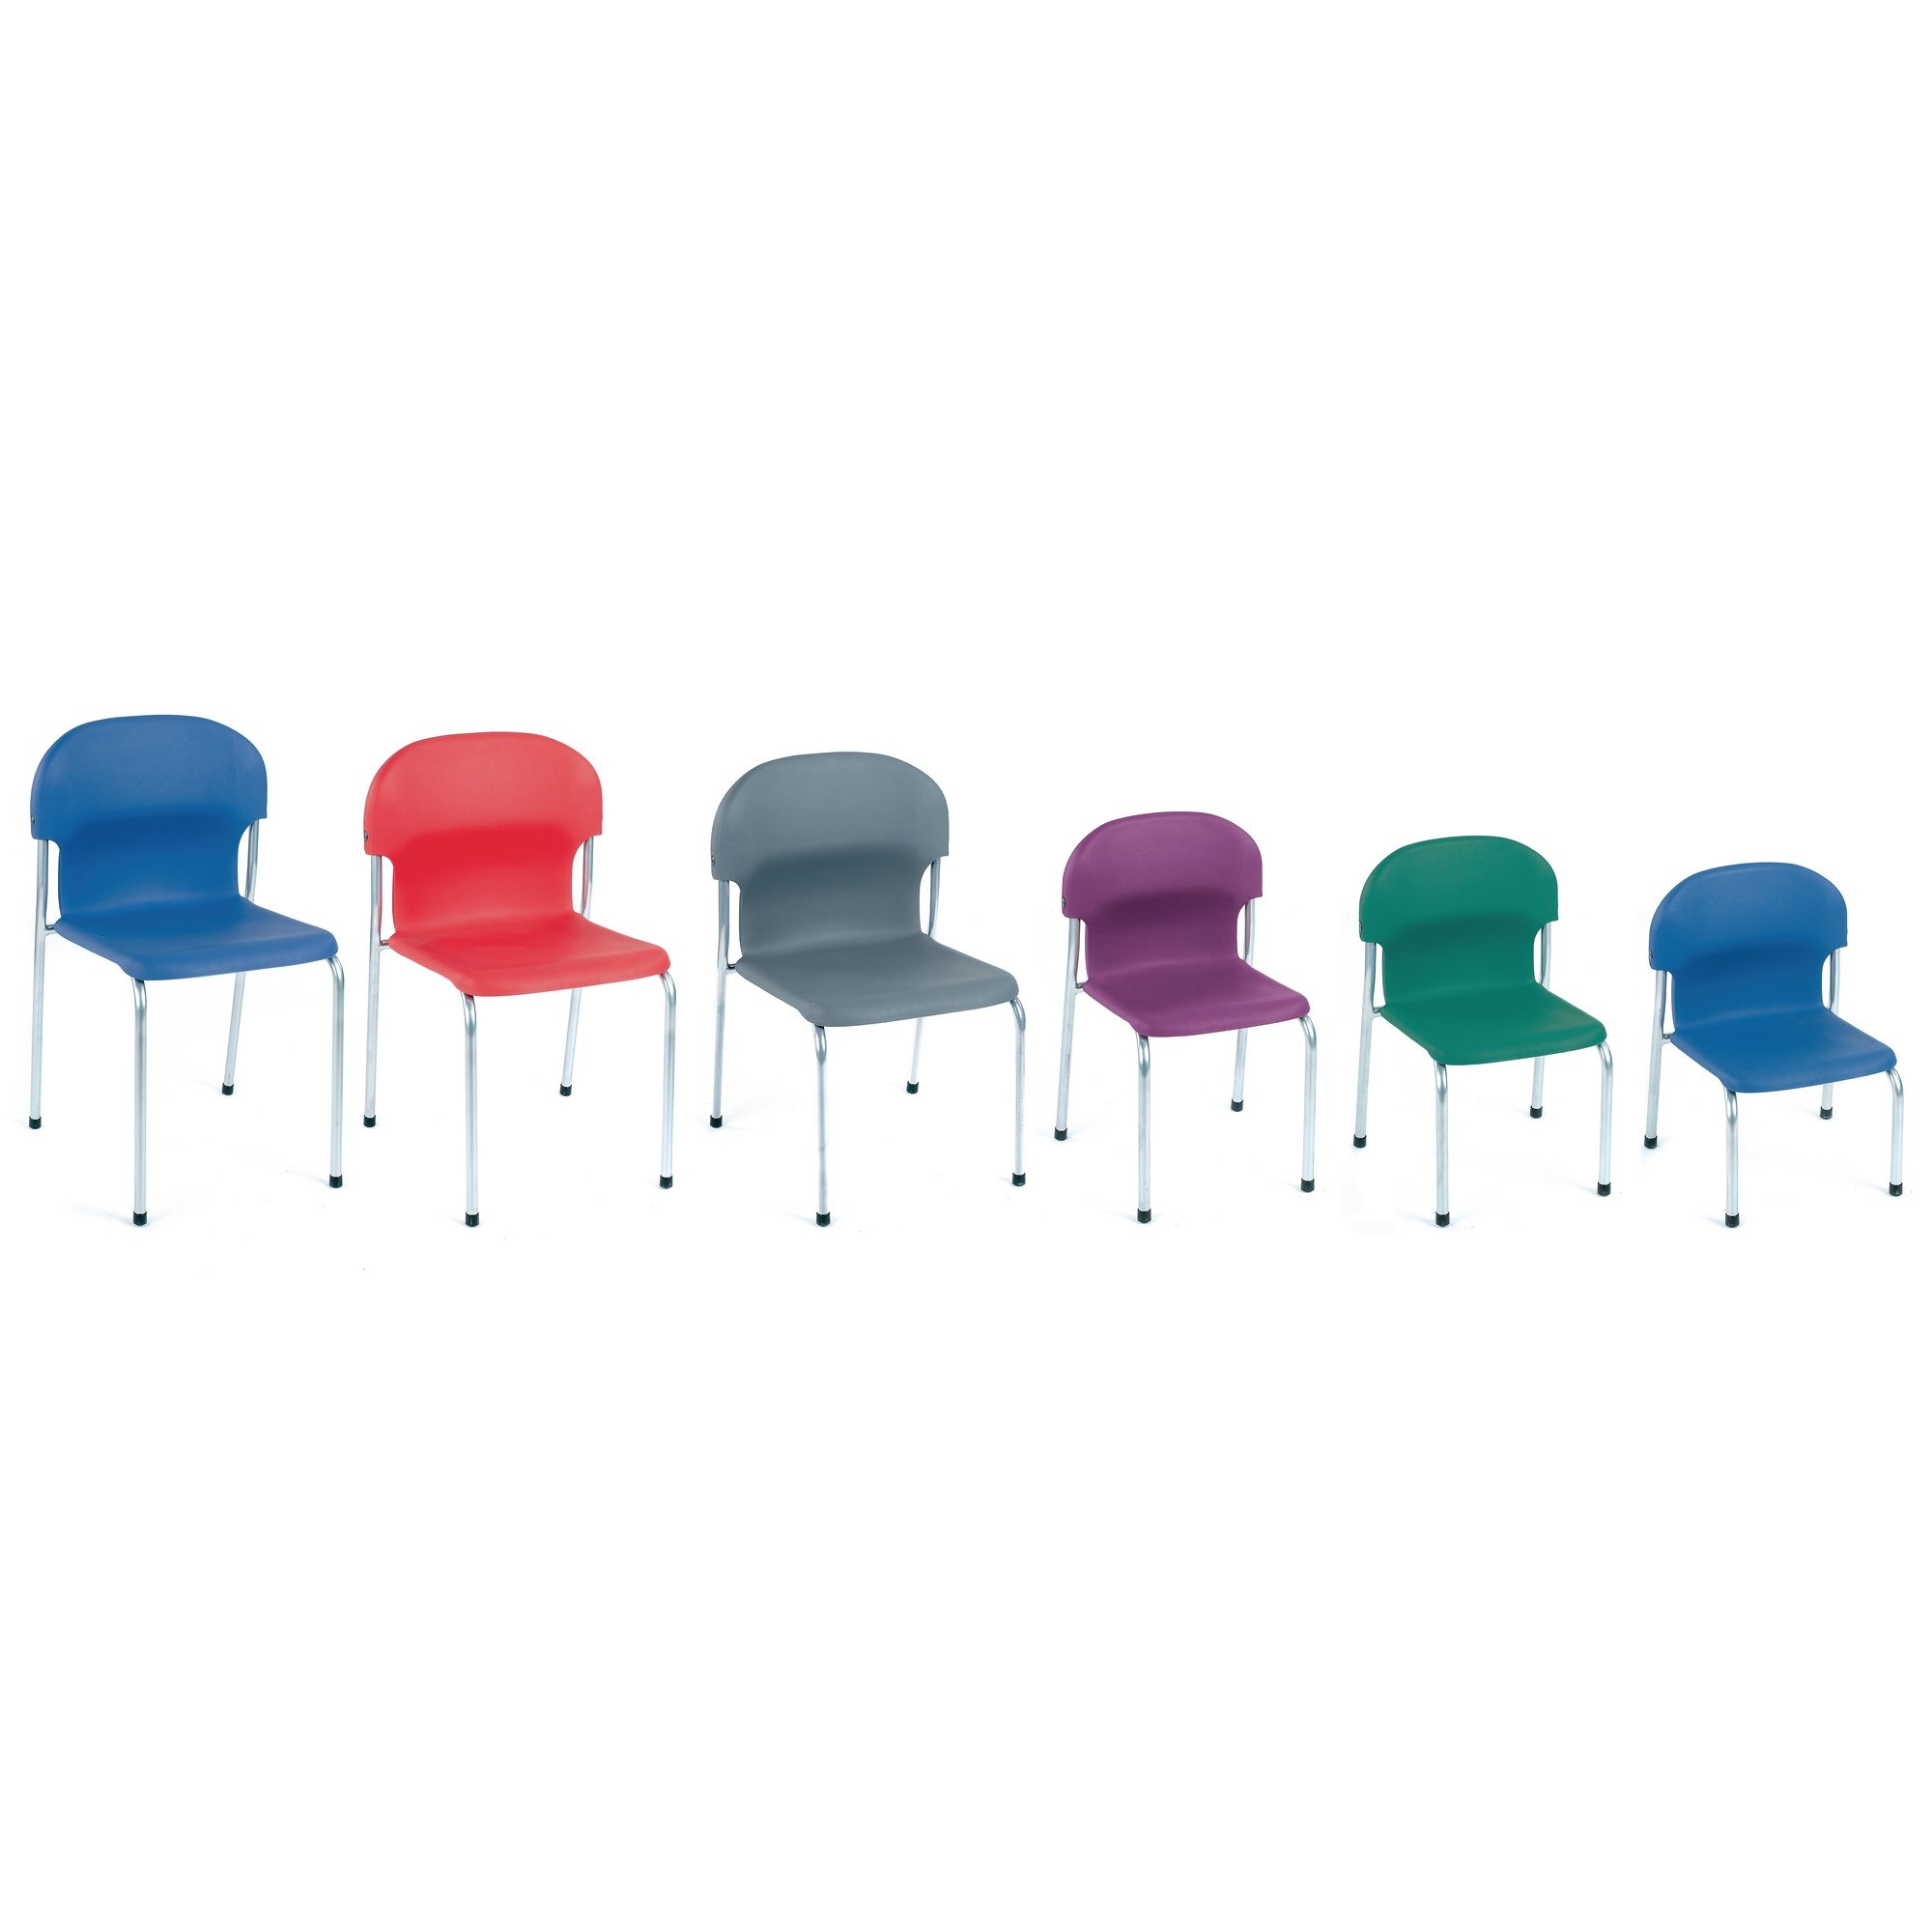 Chair 2000 - Size D - 380mm - Red